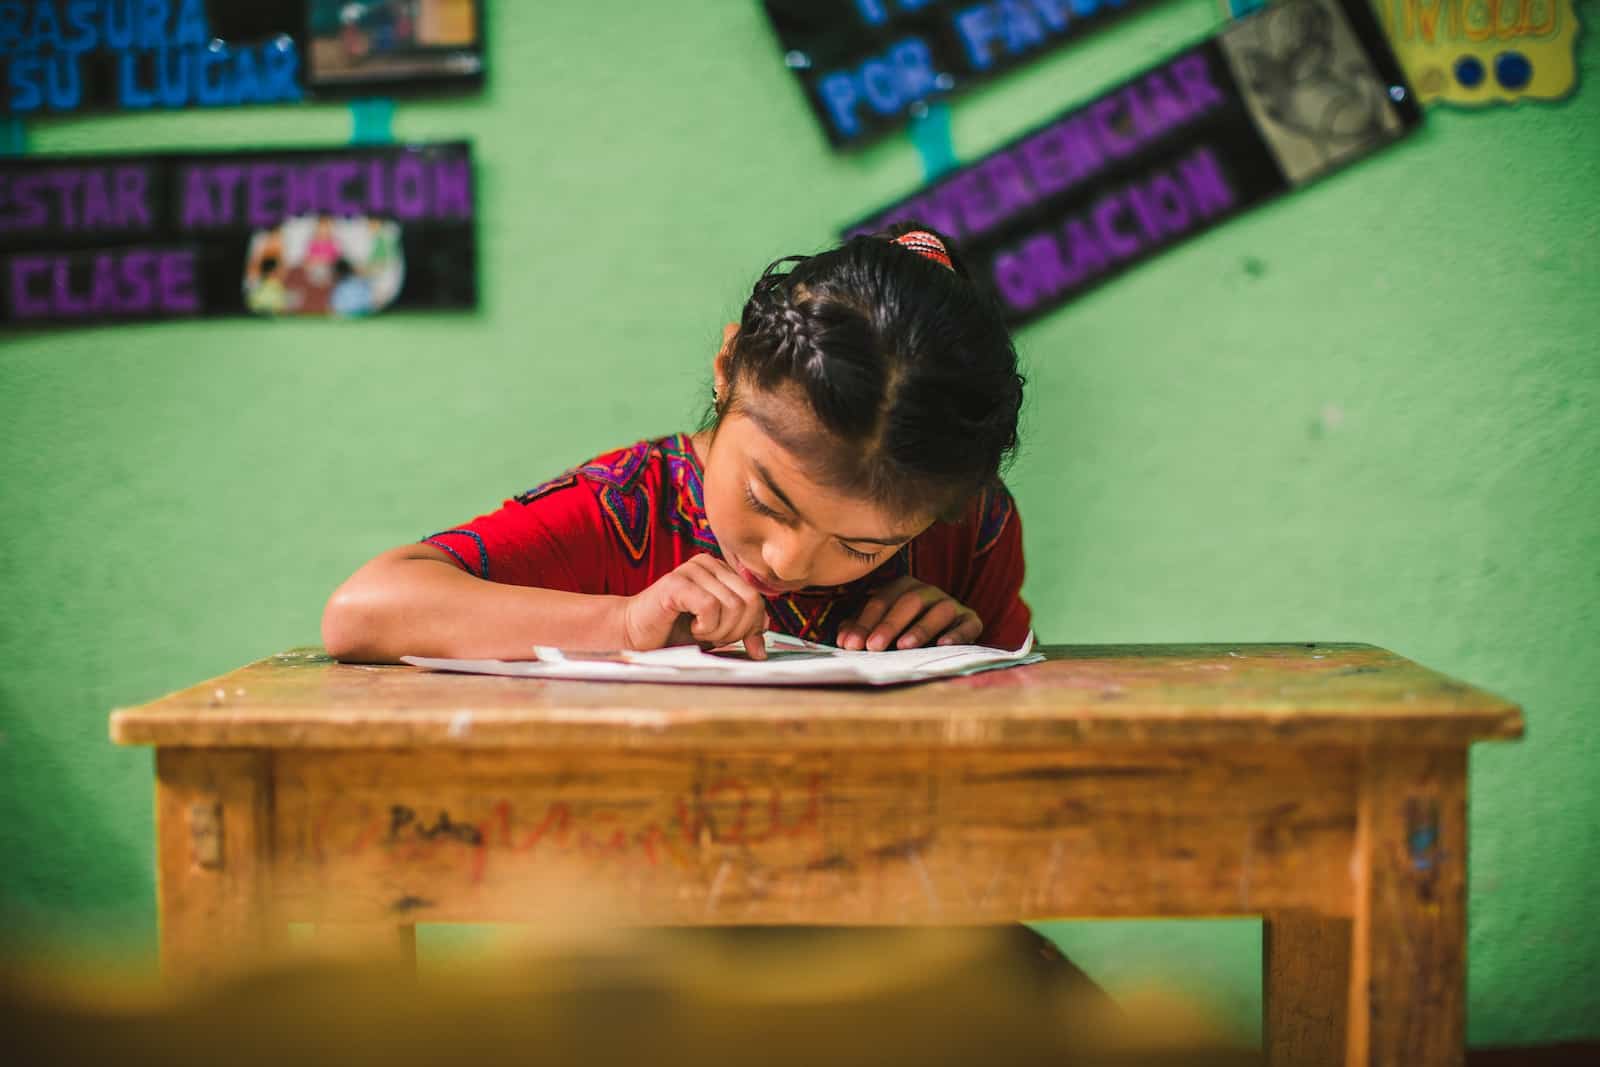 A girl from Guatemala in a red shirt with her hair pulled back sits at a wooden school desk, reading a letter. She is in front of a green wall. 